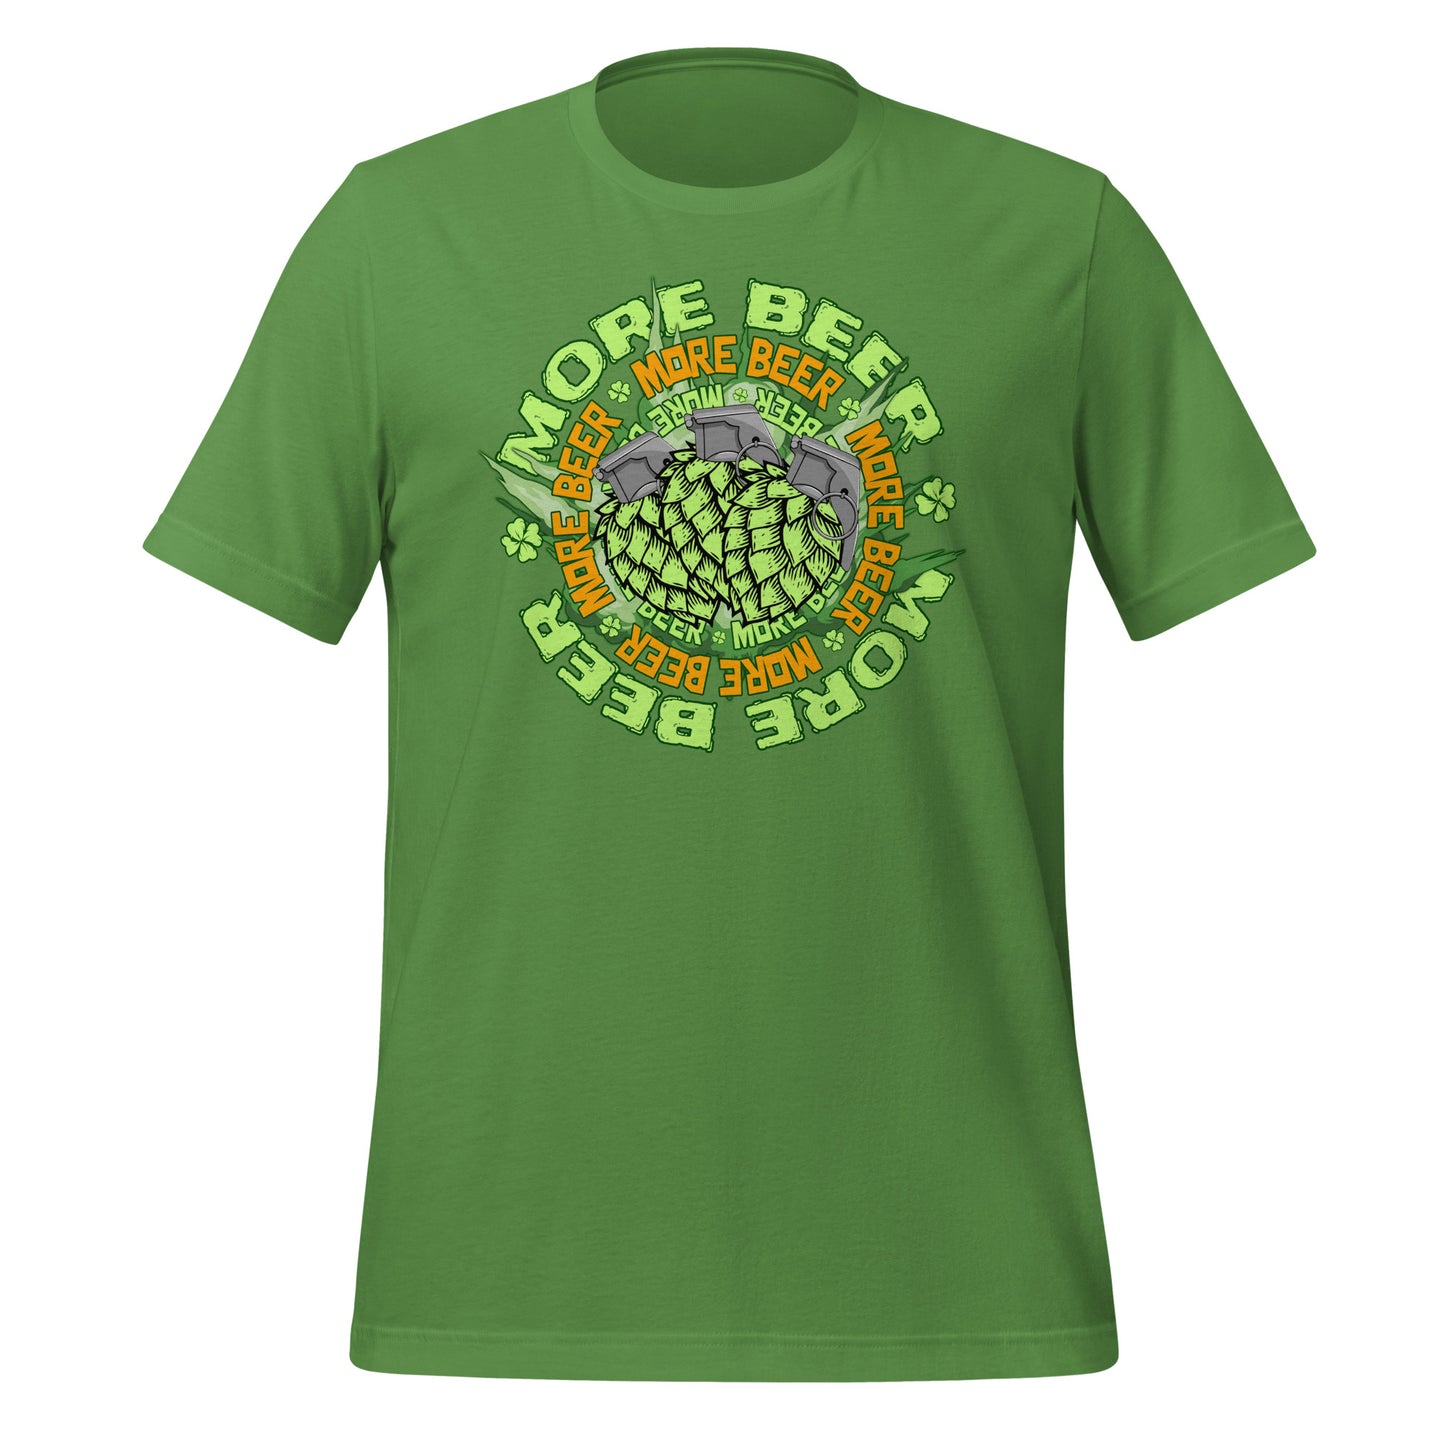 St-Patrick's-Day-More-Beer-graphic-t-shirt-leaf-green-arczeal-designs